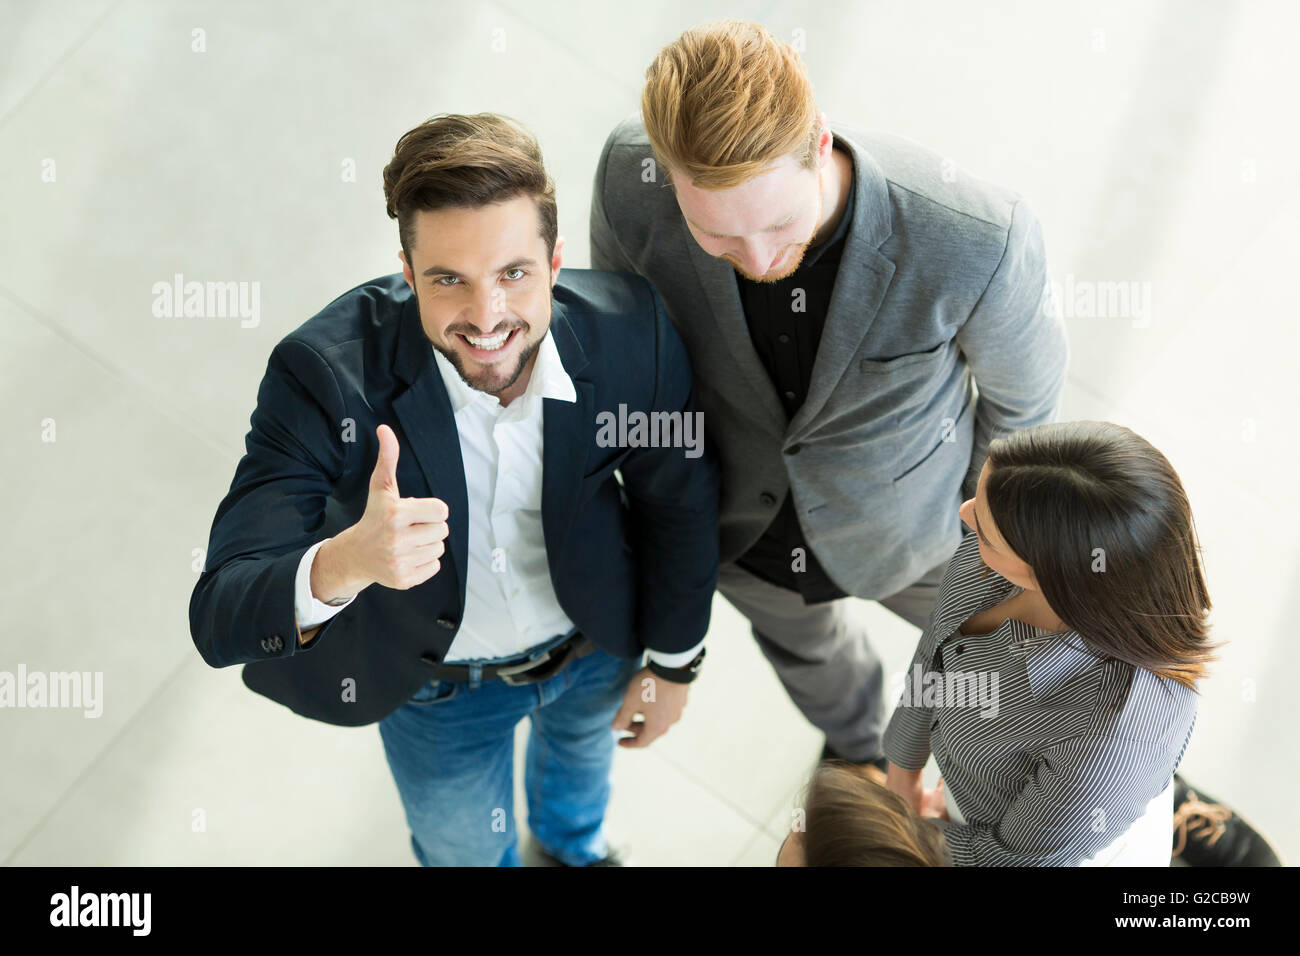 Top view of satisfied young business pepole in the office Stock Photo